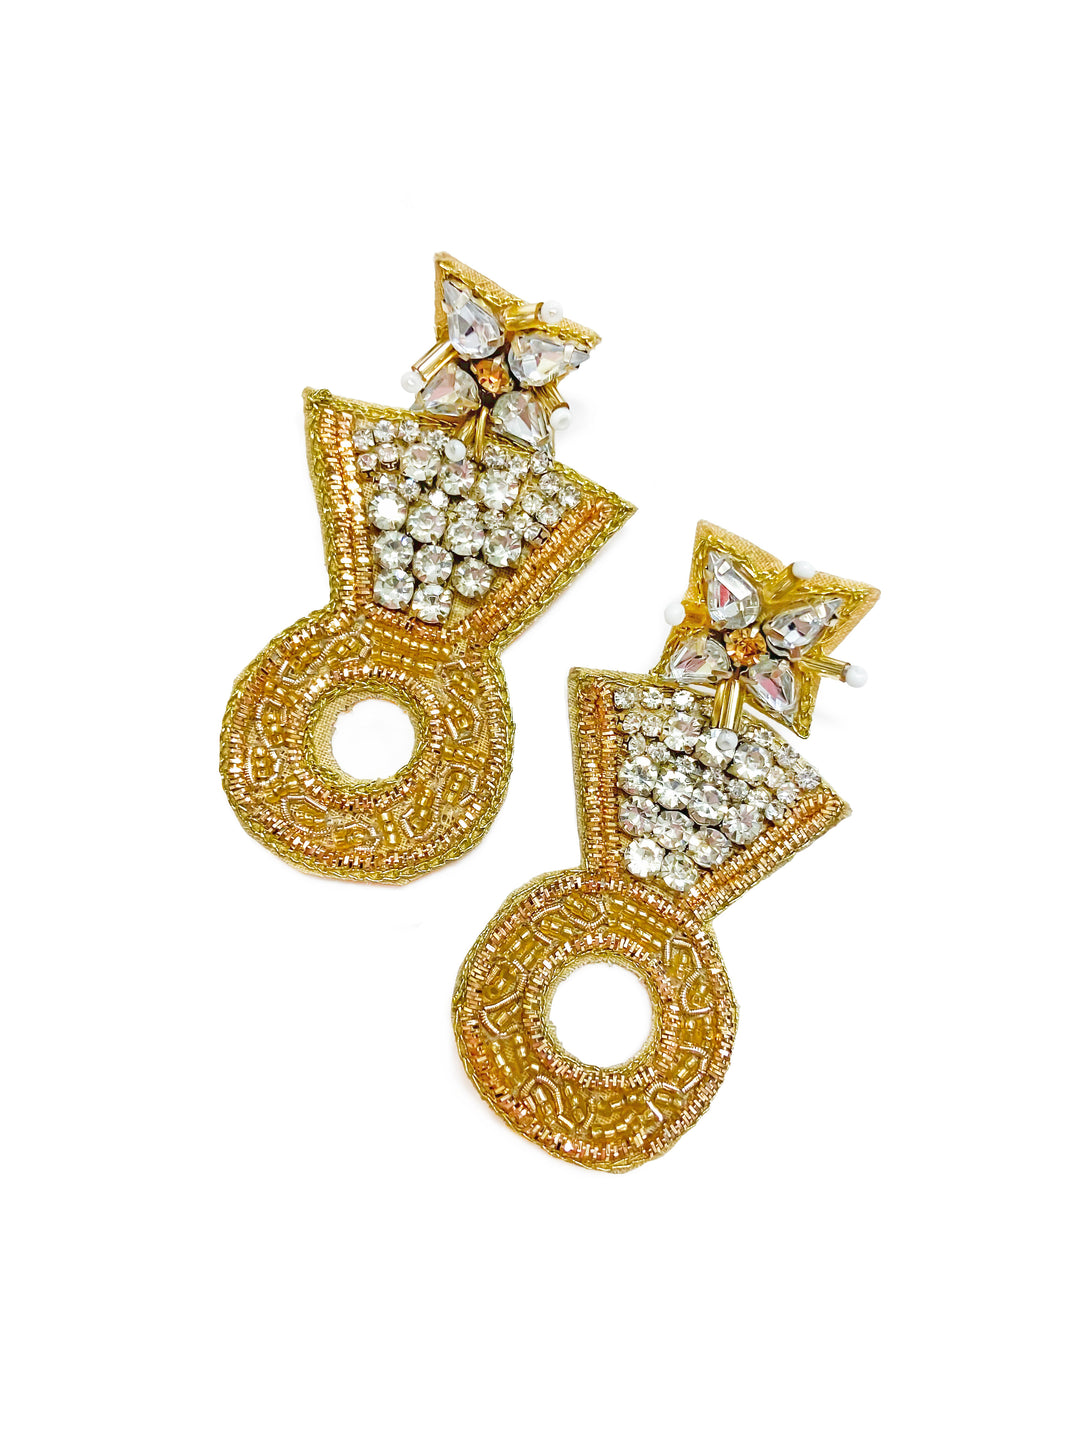 CRYSTAL BEAD RING EARRING- GOLD